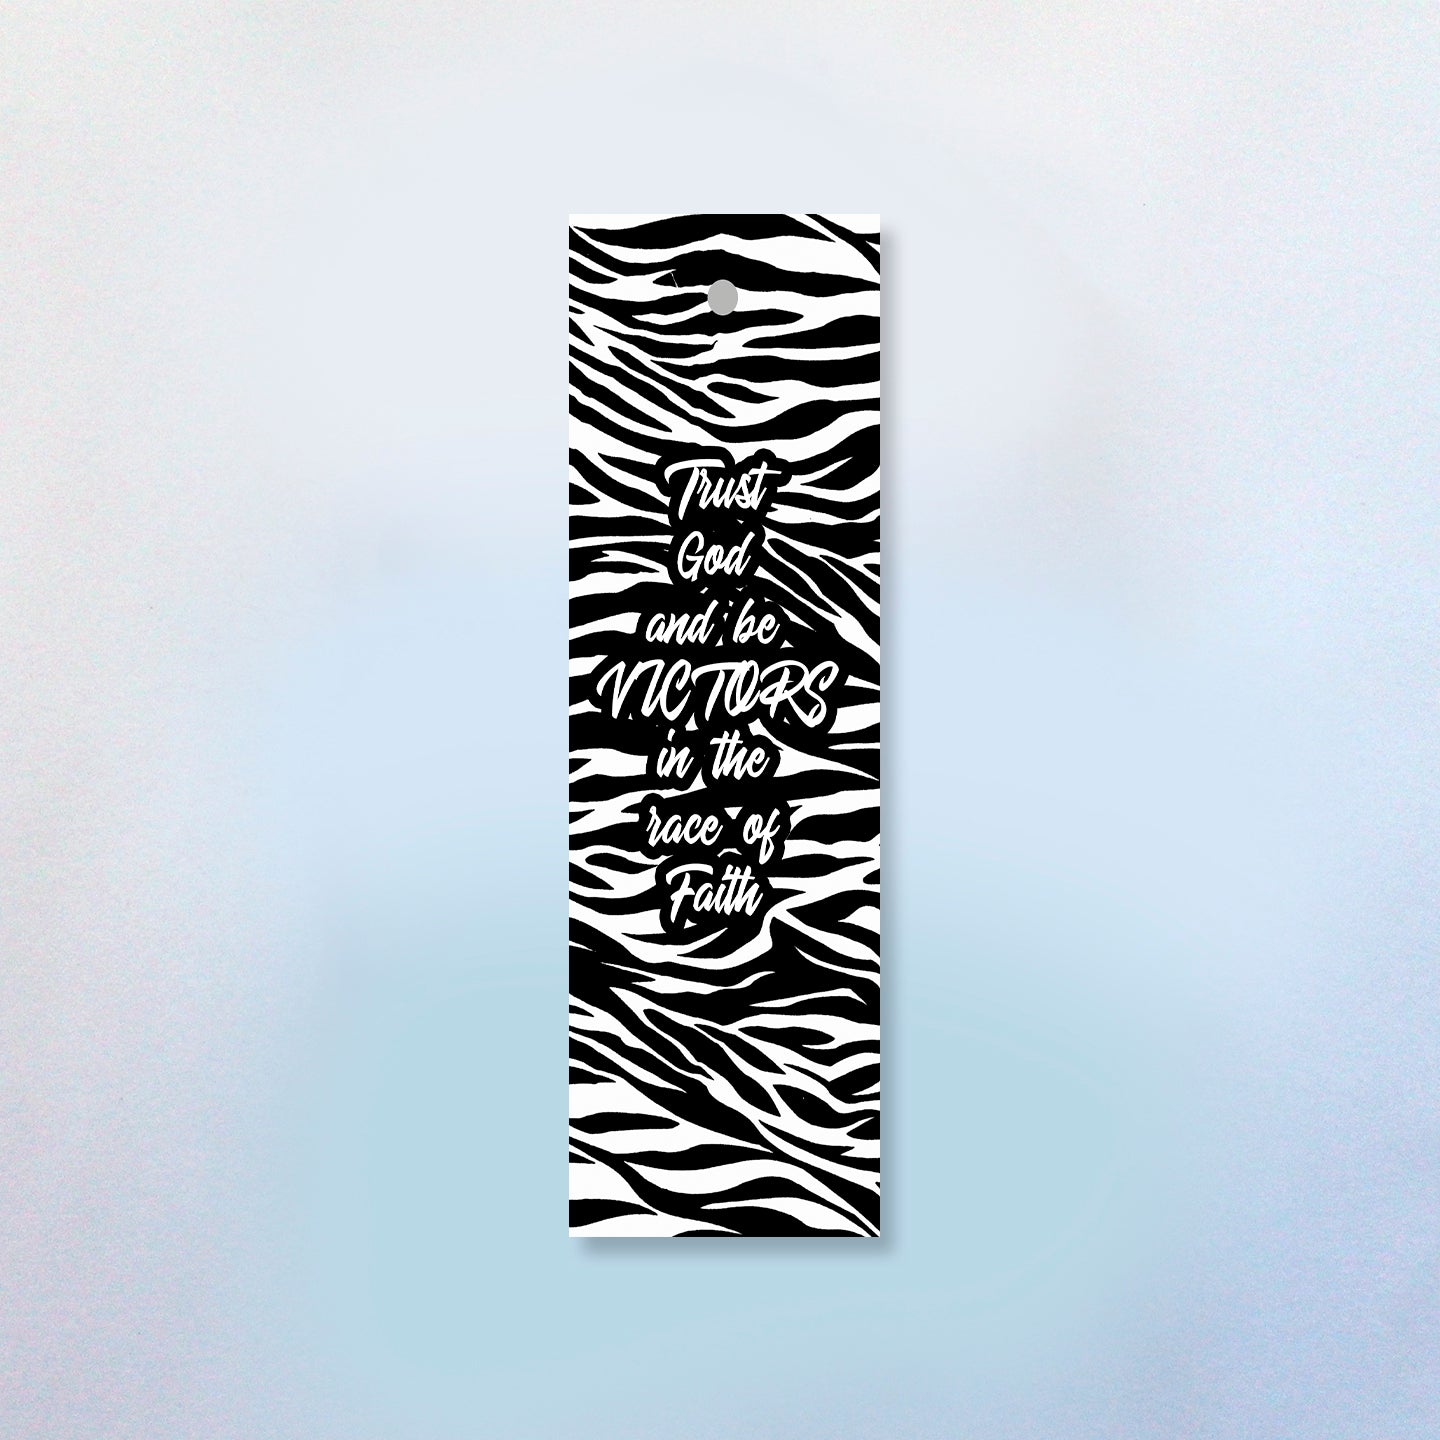 Trust God and be Victors in the Race of Faith ( 2 Styles ) Bookmark